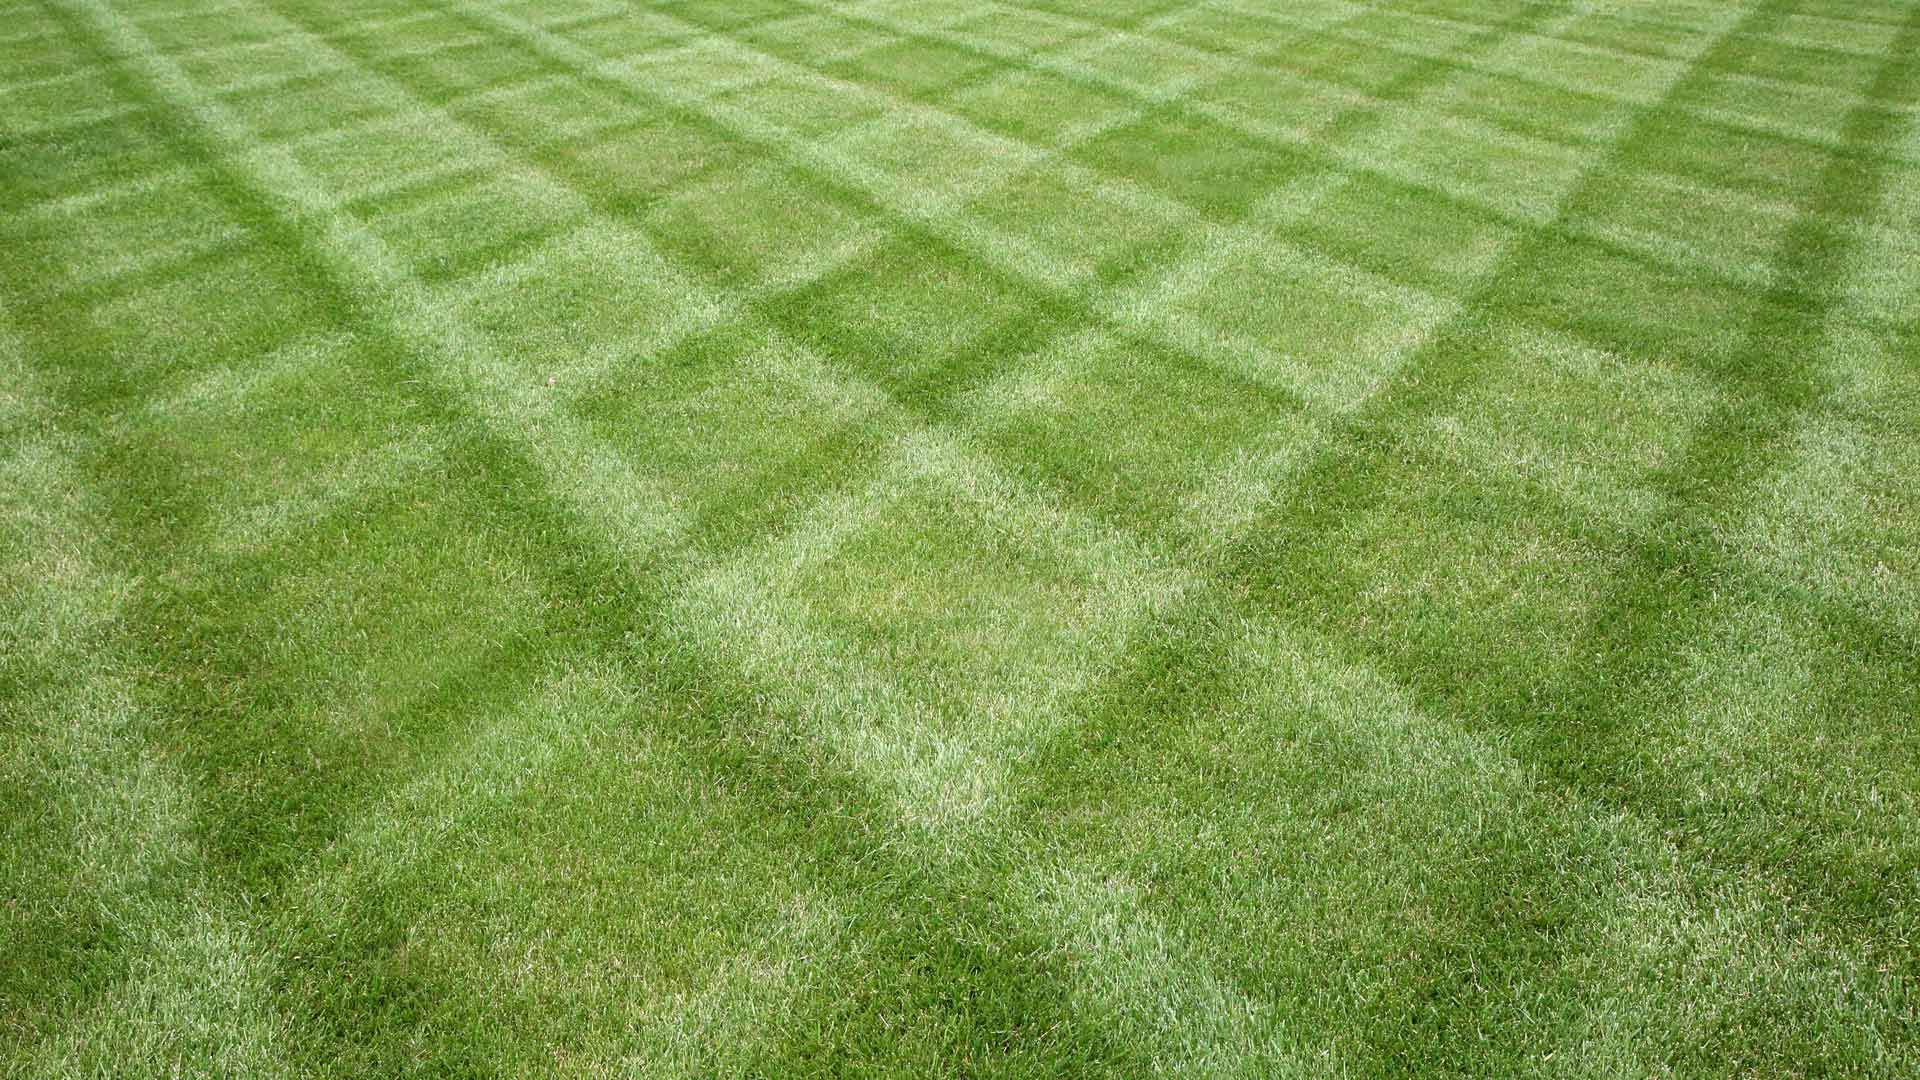 Mowing patterns in a lawn after service in Woodway, TX.